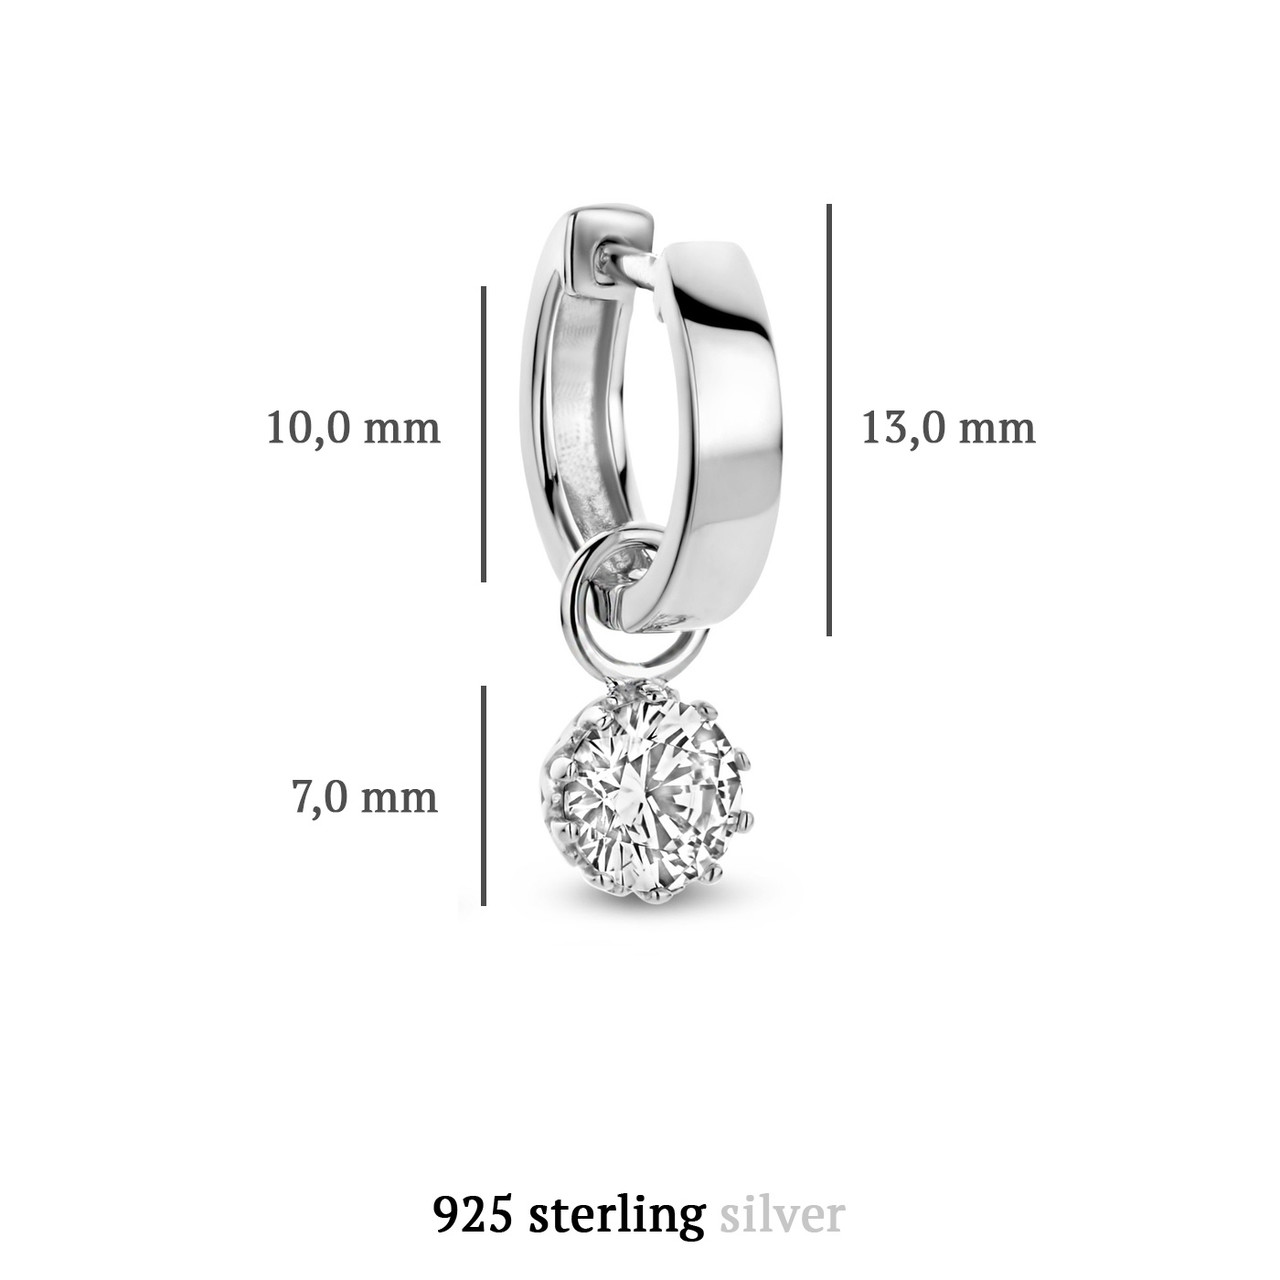 Parte Di Me Sterling PDM36043 Creolen - 925 Silber